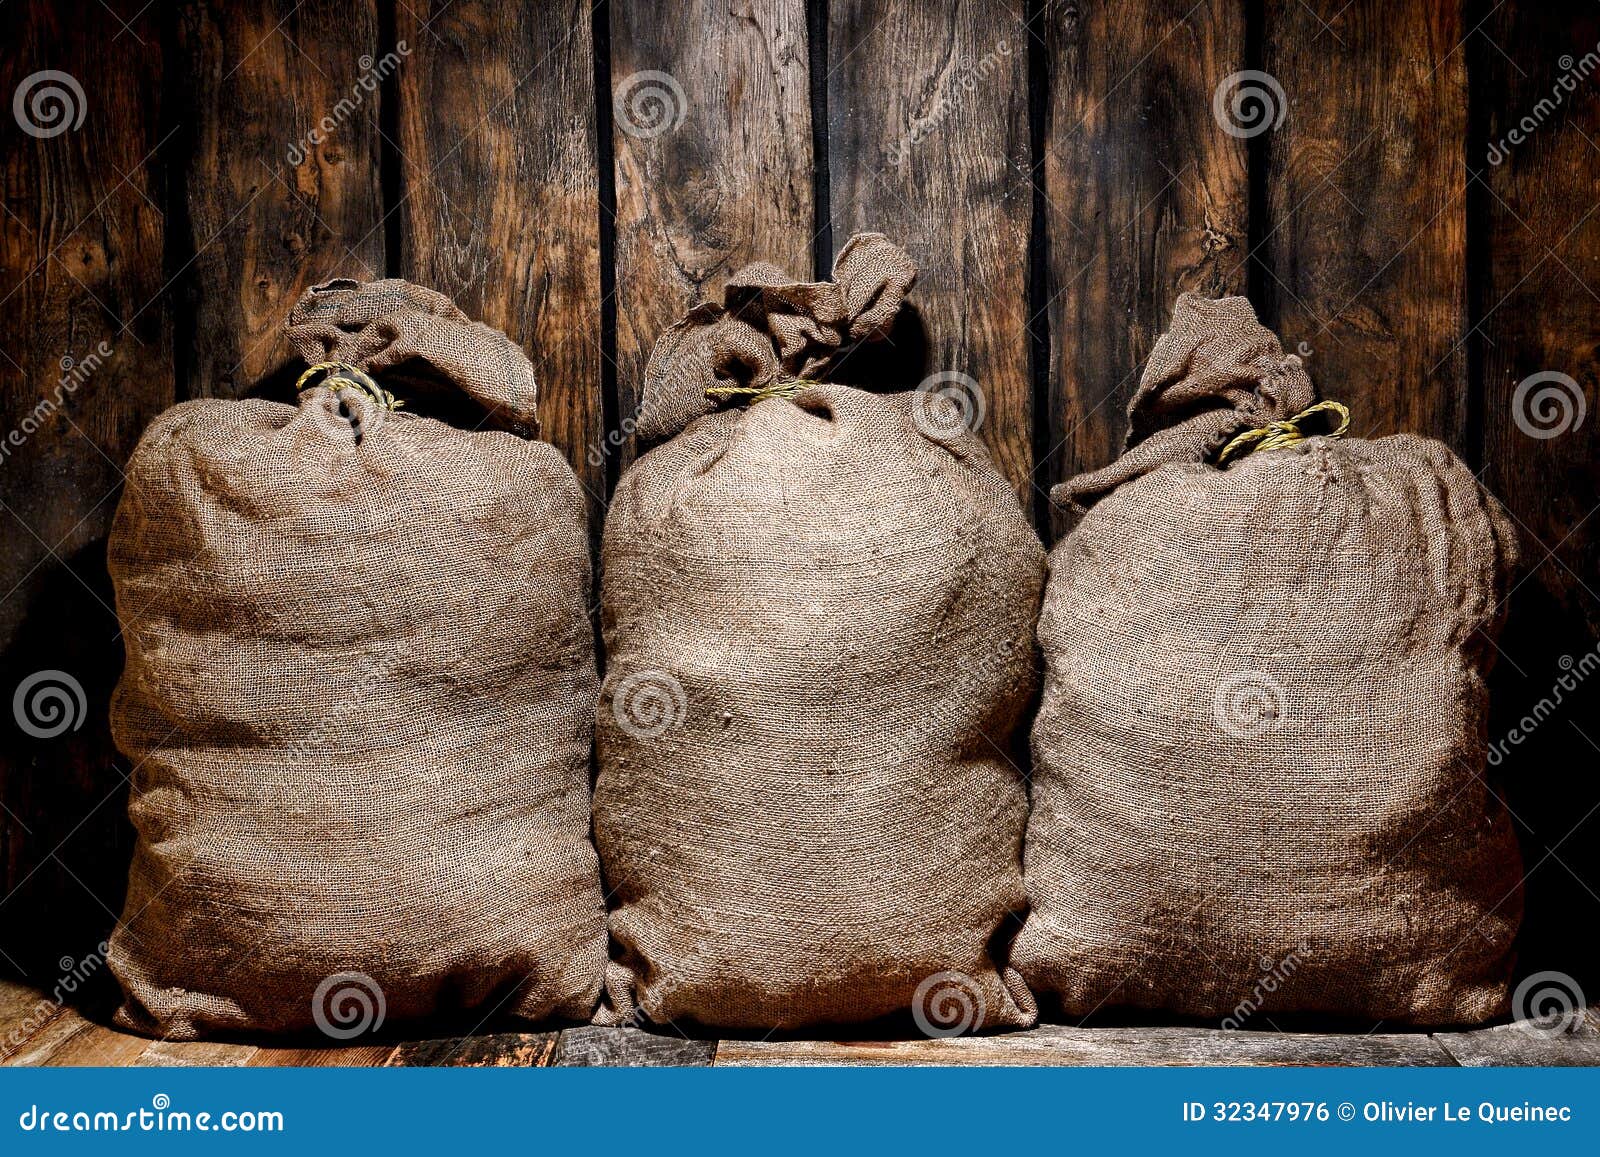 Vintage Burlap Sac Bags in Old Antique Warehouse Stock Photo - Image of  storage, ready: 32347976